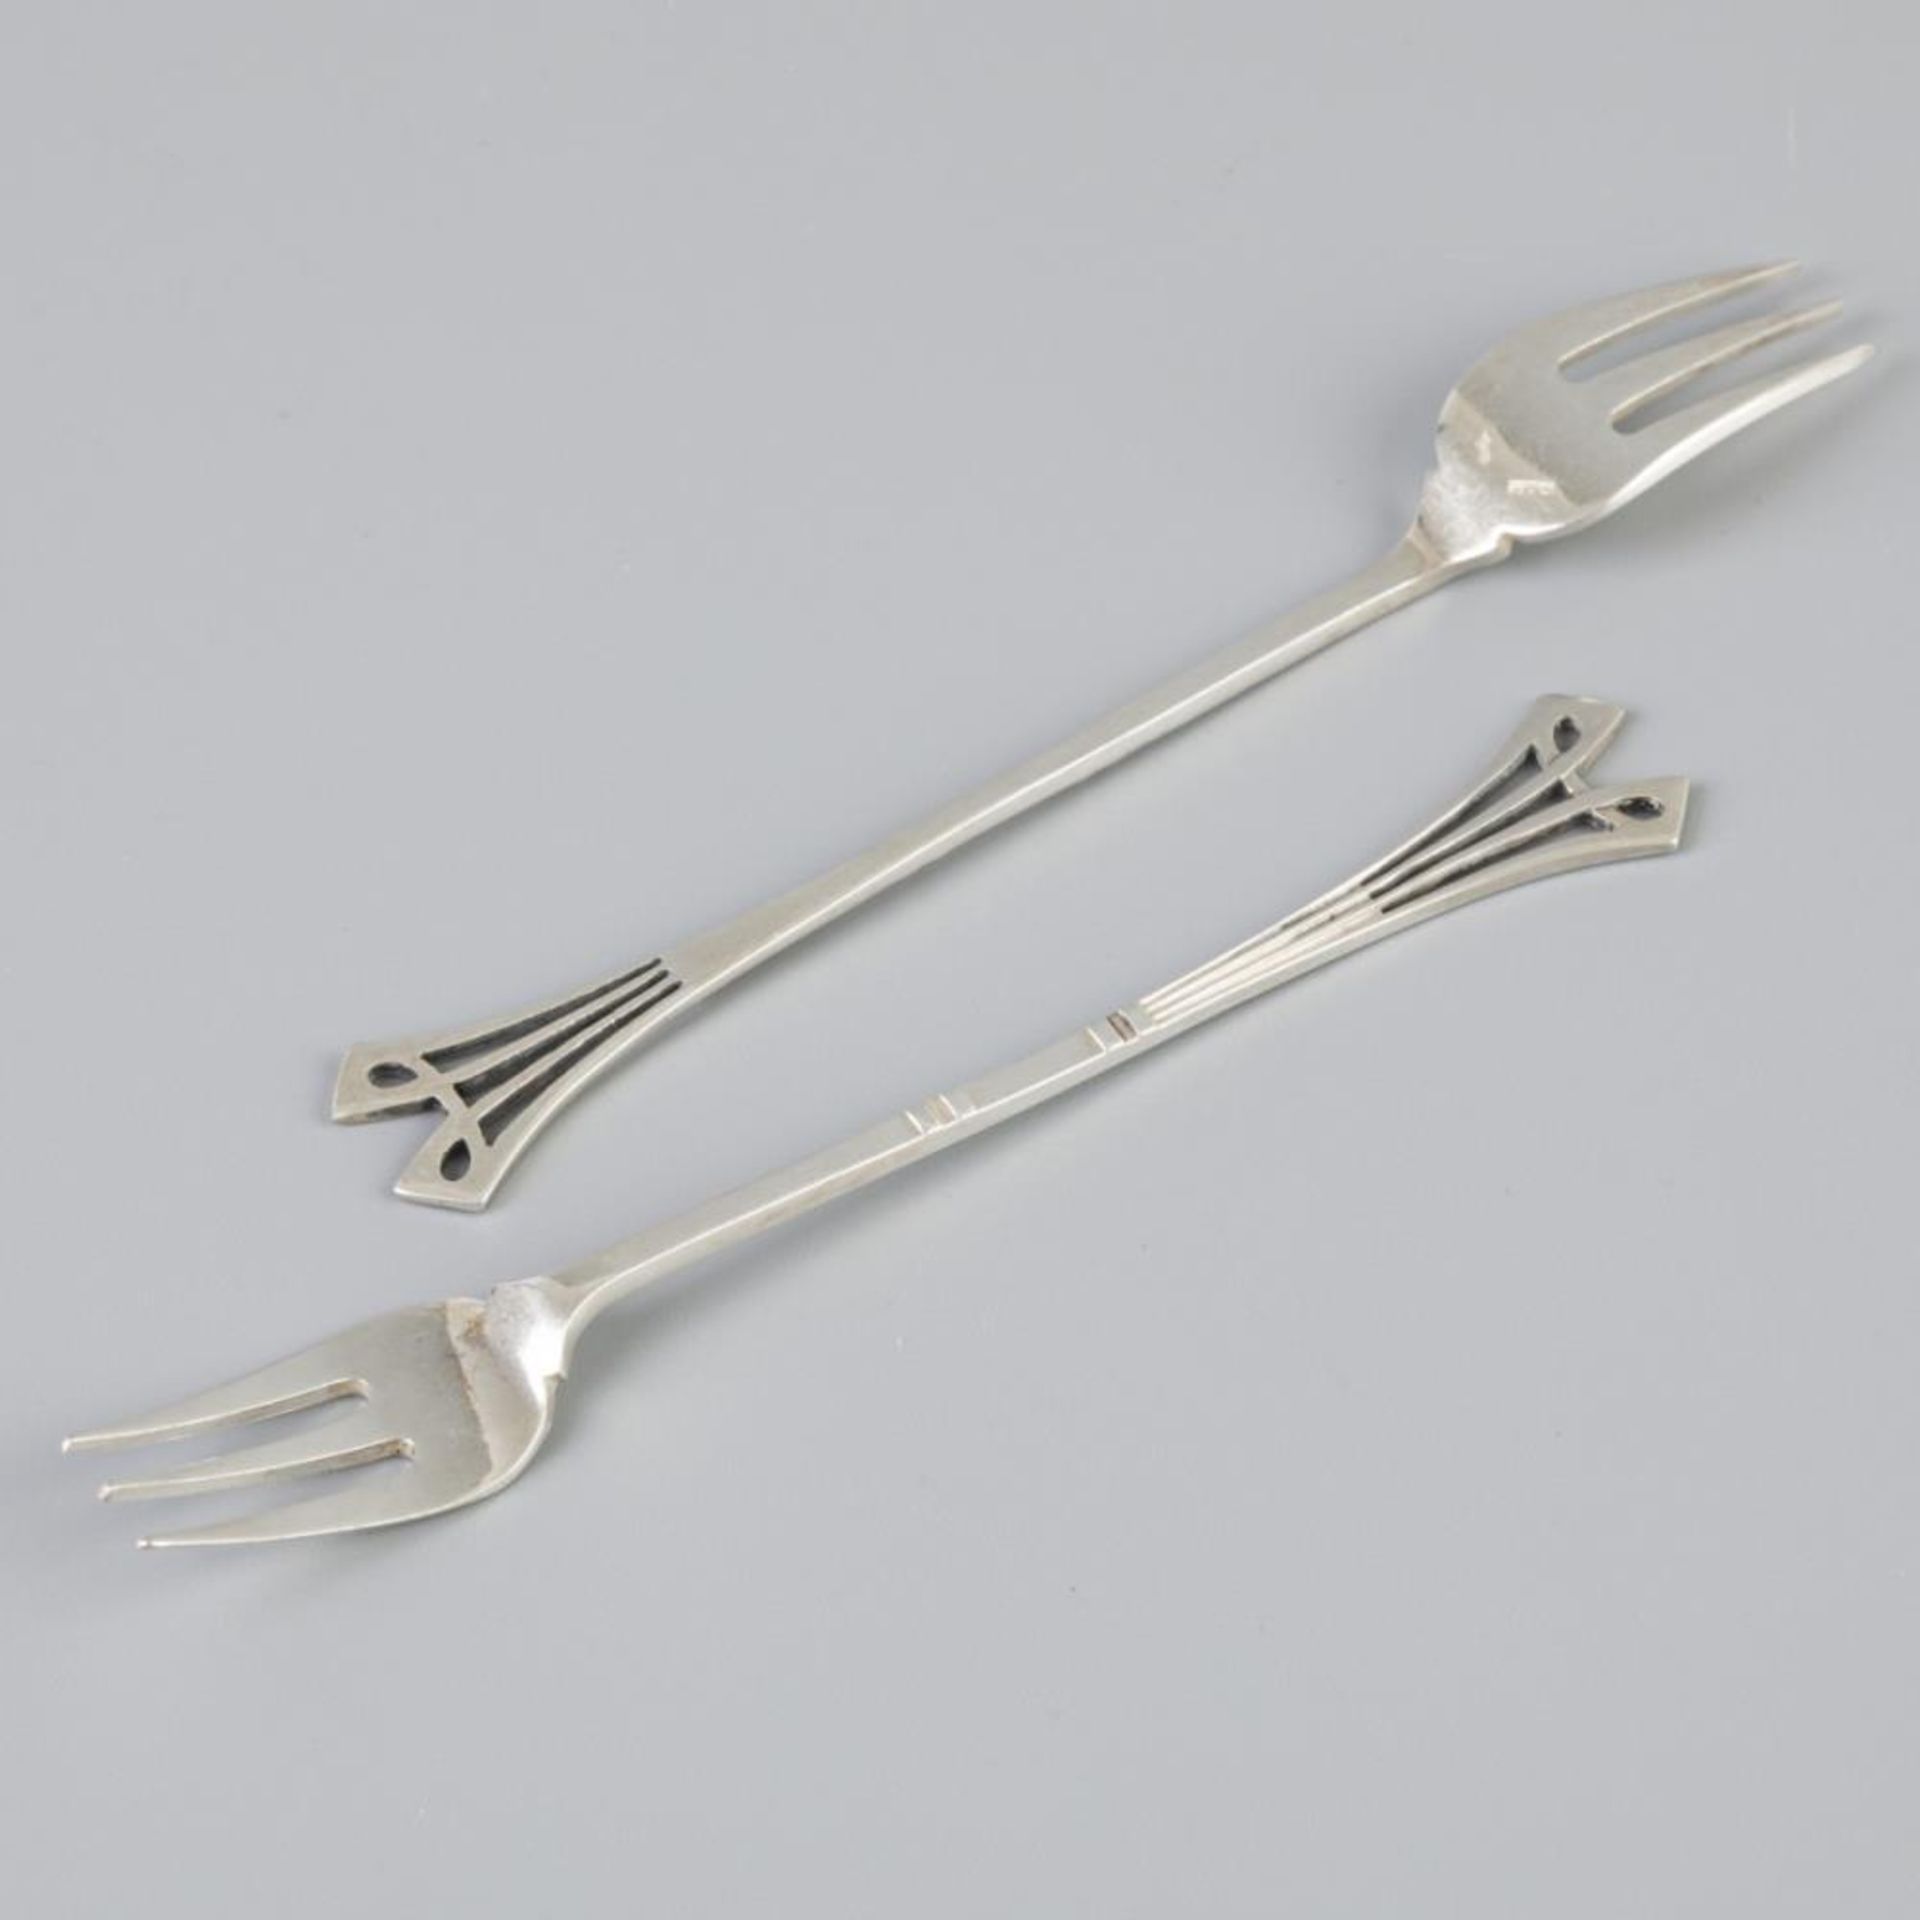 12 piece set silver pastry forks. - Image 5 of 6